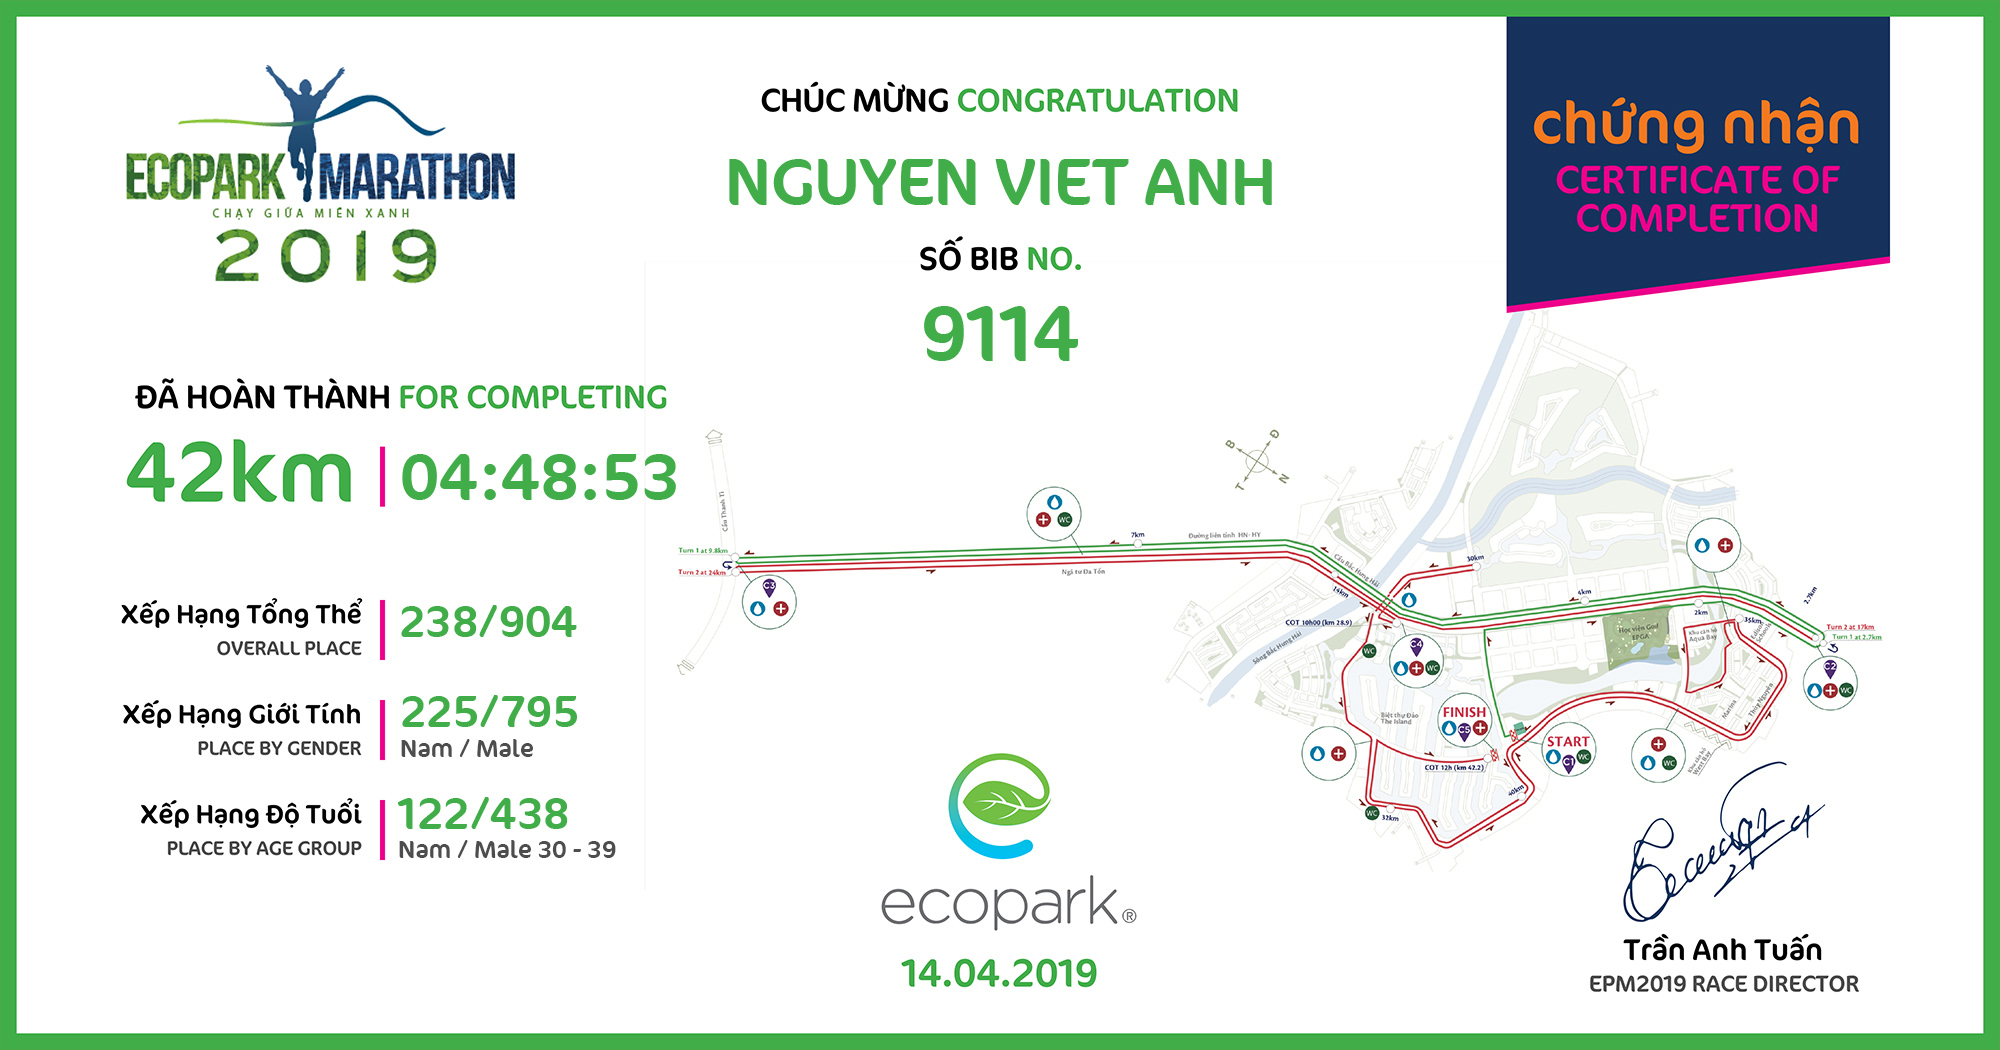 9114 - Nguyen Viet Anh